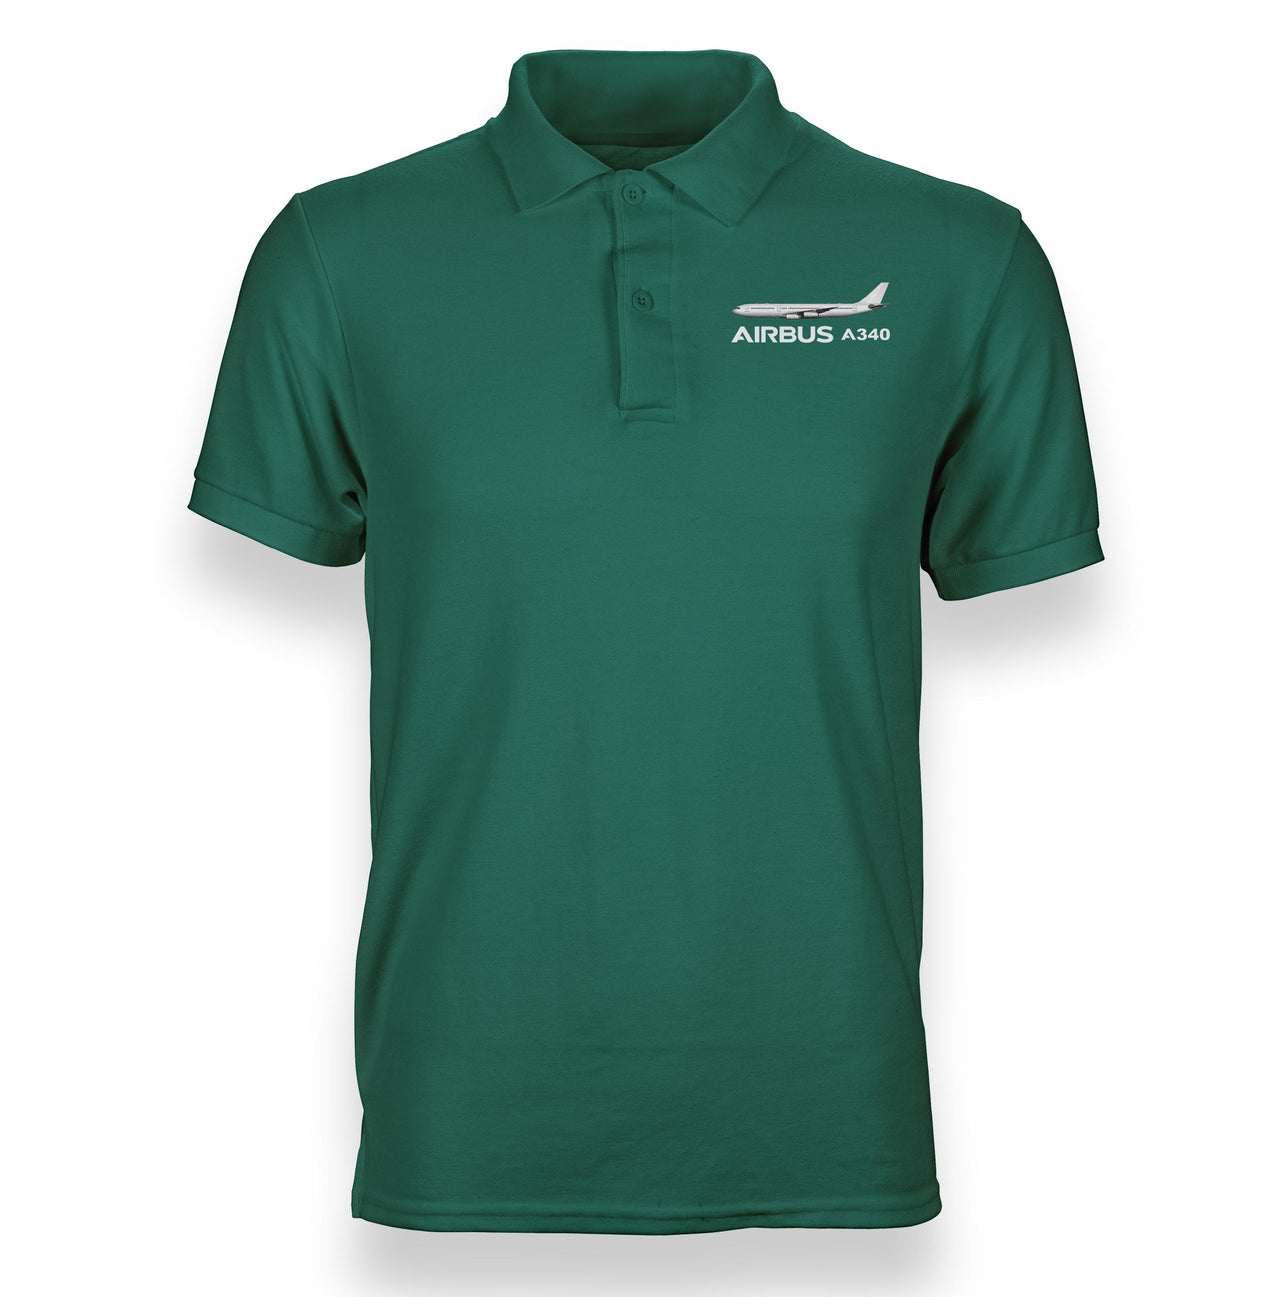 The Airbus A340 Designed Polo T-Shirts